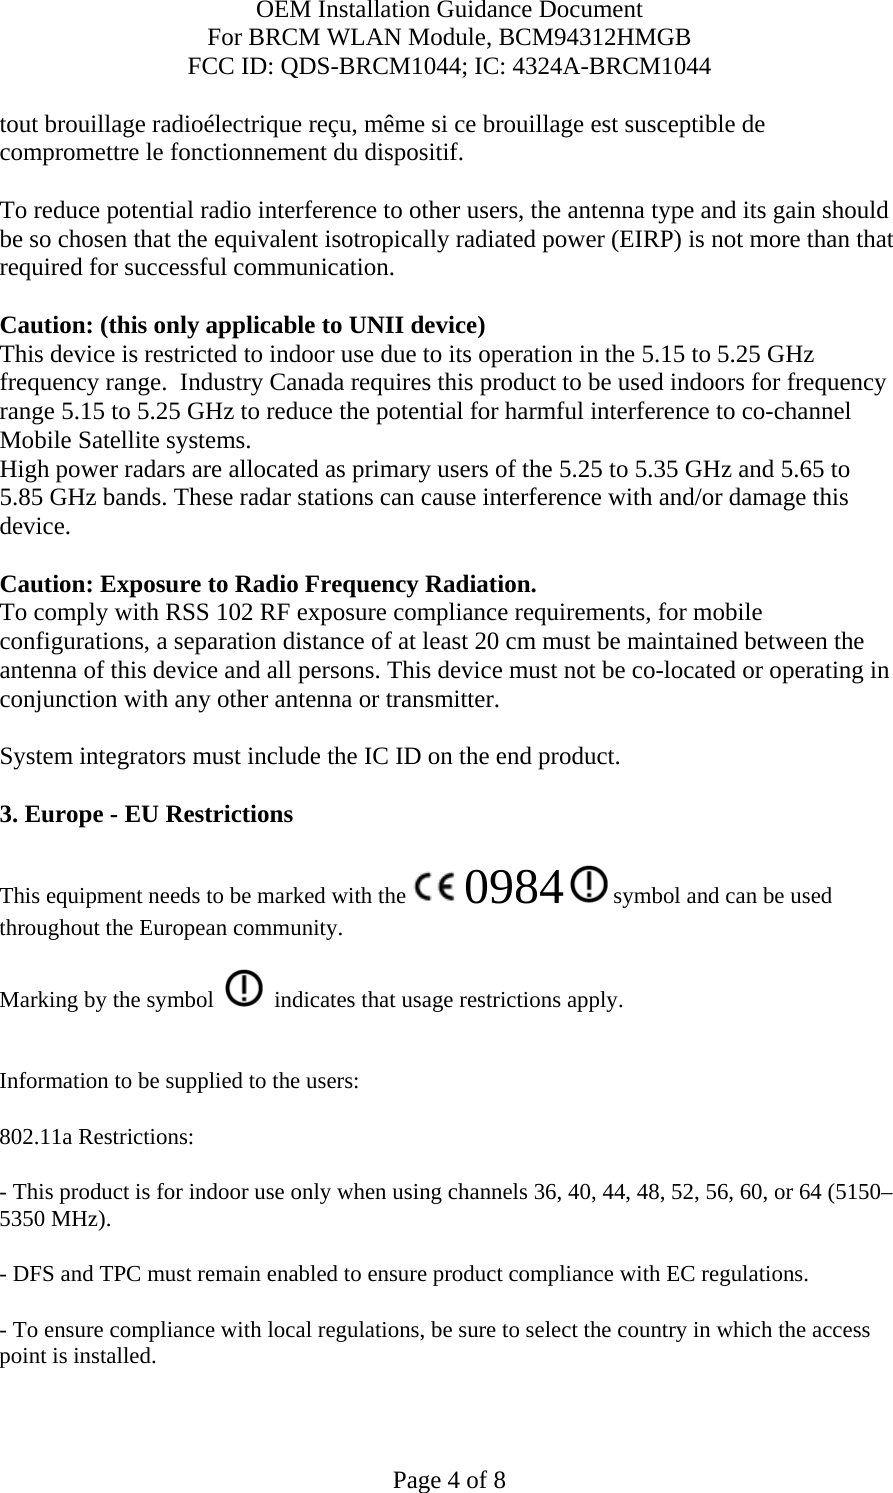 OEM Installation Guidance Document For BRCM WLAN Module, BCM94312HMGB FCC ID: QDS-BRCM1044; IC: 4324A-BRCM1044  Page 4 of 8 tout brouillage radioélectrique reçu, même si ce brouillage est susceptible de compromettre le fonctionnement du dispositif.  To reduce potential radio interference to other users, the antenna type and its gain should be so chosen that the equivalent isotropically radiated power (EIRP) is not more than that required for successful communication.  Caution: (this only applicable to UNII device) This device is restricted to indoor use due to its operation in the 5.15 to 5.25 GHz frequency range.  Industry Canada requires this product to be used indoors for frequency range 5.15 to 5.25 GHz to reduce the potential for harmful interference to co-channel Mobile Satellite systems. High power radars are allocated as primary users of the 5.25 to 5.35 GHz and 5.65 to 5.85 GHz bands. These radar stations can cause interference with and/or damage this device.  Caution: Exposure to Radio Frequency Radiation. To comply with RSS 102 RF exposure compliance requirements, for mobile configurations, a separation distance of at least 20 cm must be maintained between the antenna of this device and all persons. This device must not be co-located or operating in conjunction with any other antenna or transmitter.  System integrators must include the IC ID on the end product.   3. Europe - EU Restrictions This equipment needs to be marked with the   0984  symbol and can be used throughout the European community.  Marking by the symbol     indicates that usage restrictions apply.  Information to be supplied to the users: 802.11a Restrictions: - This product is for indoor use only when using channels 36, 40, 44, 48, 52, 56, 60, or 64 (5150–5350 MHz).       - DFS and TPC must remain enabled to ensure product compliance with EC regulations.      - To ensure compliance with local regulations, be sure to select the country in which the access point is installed. 